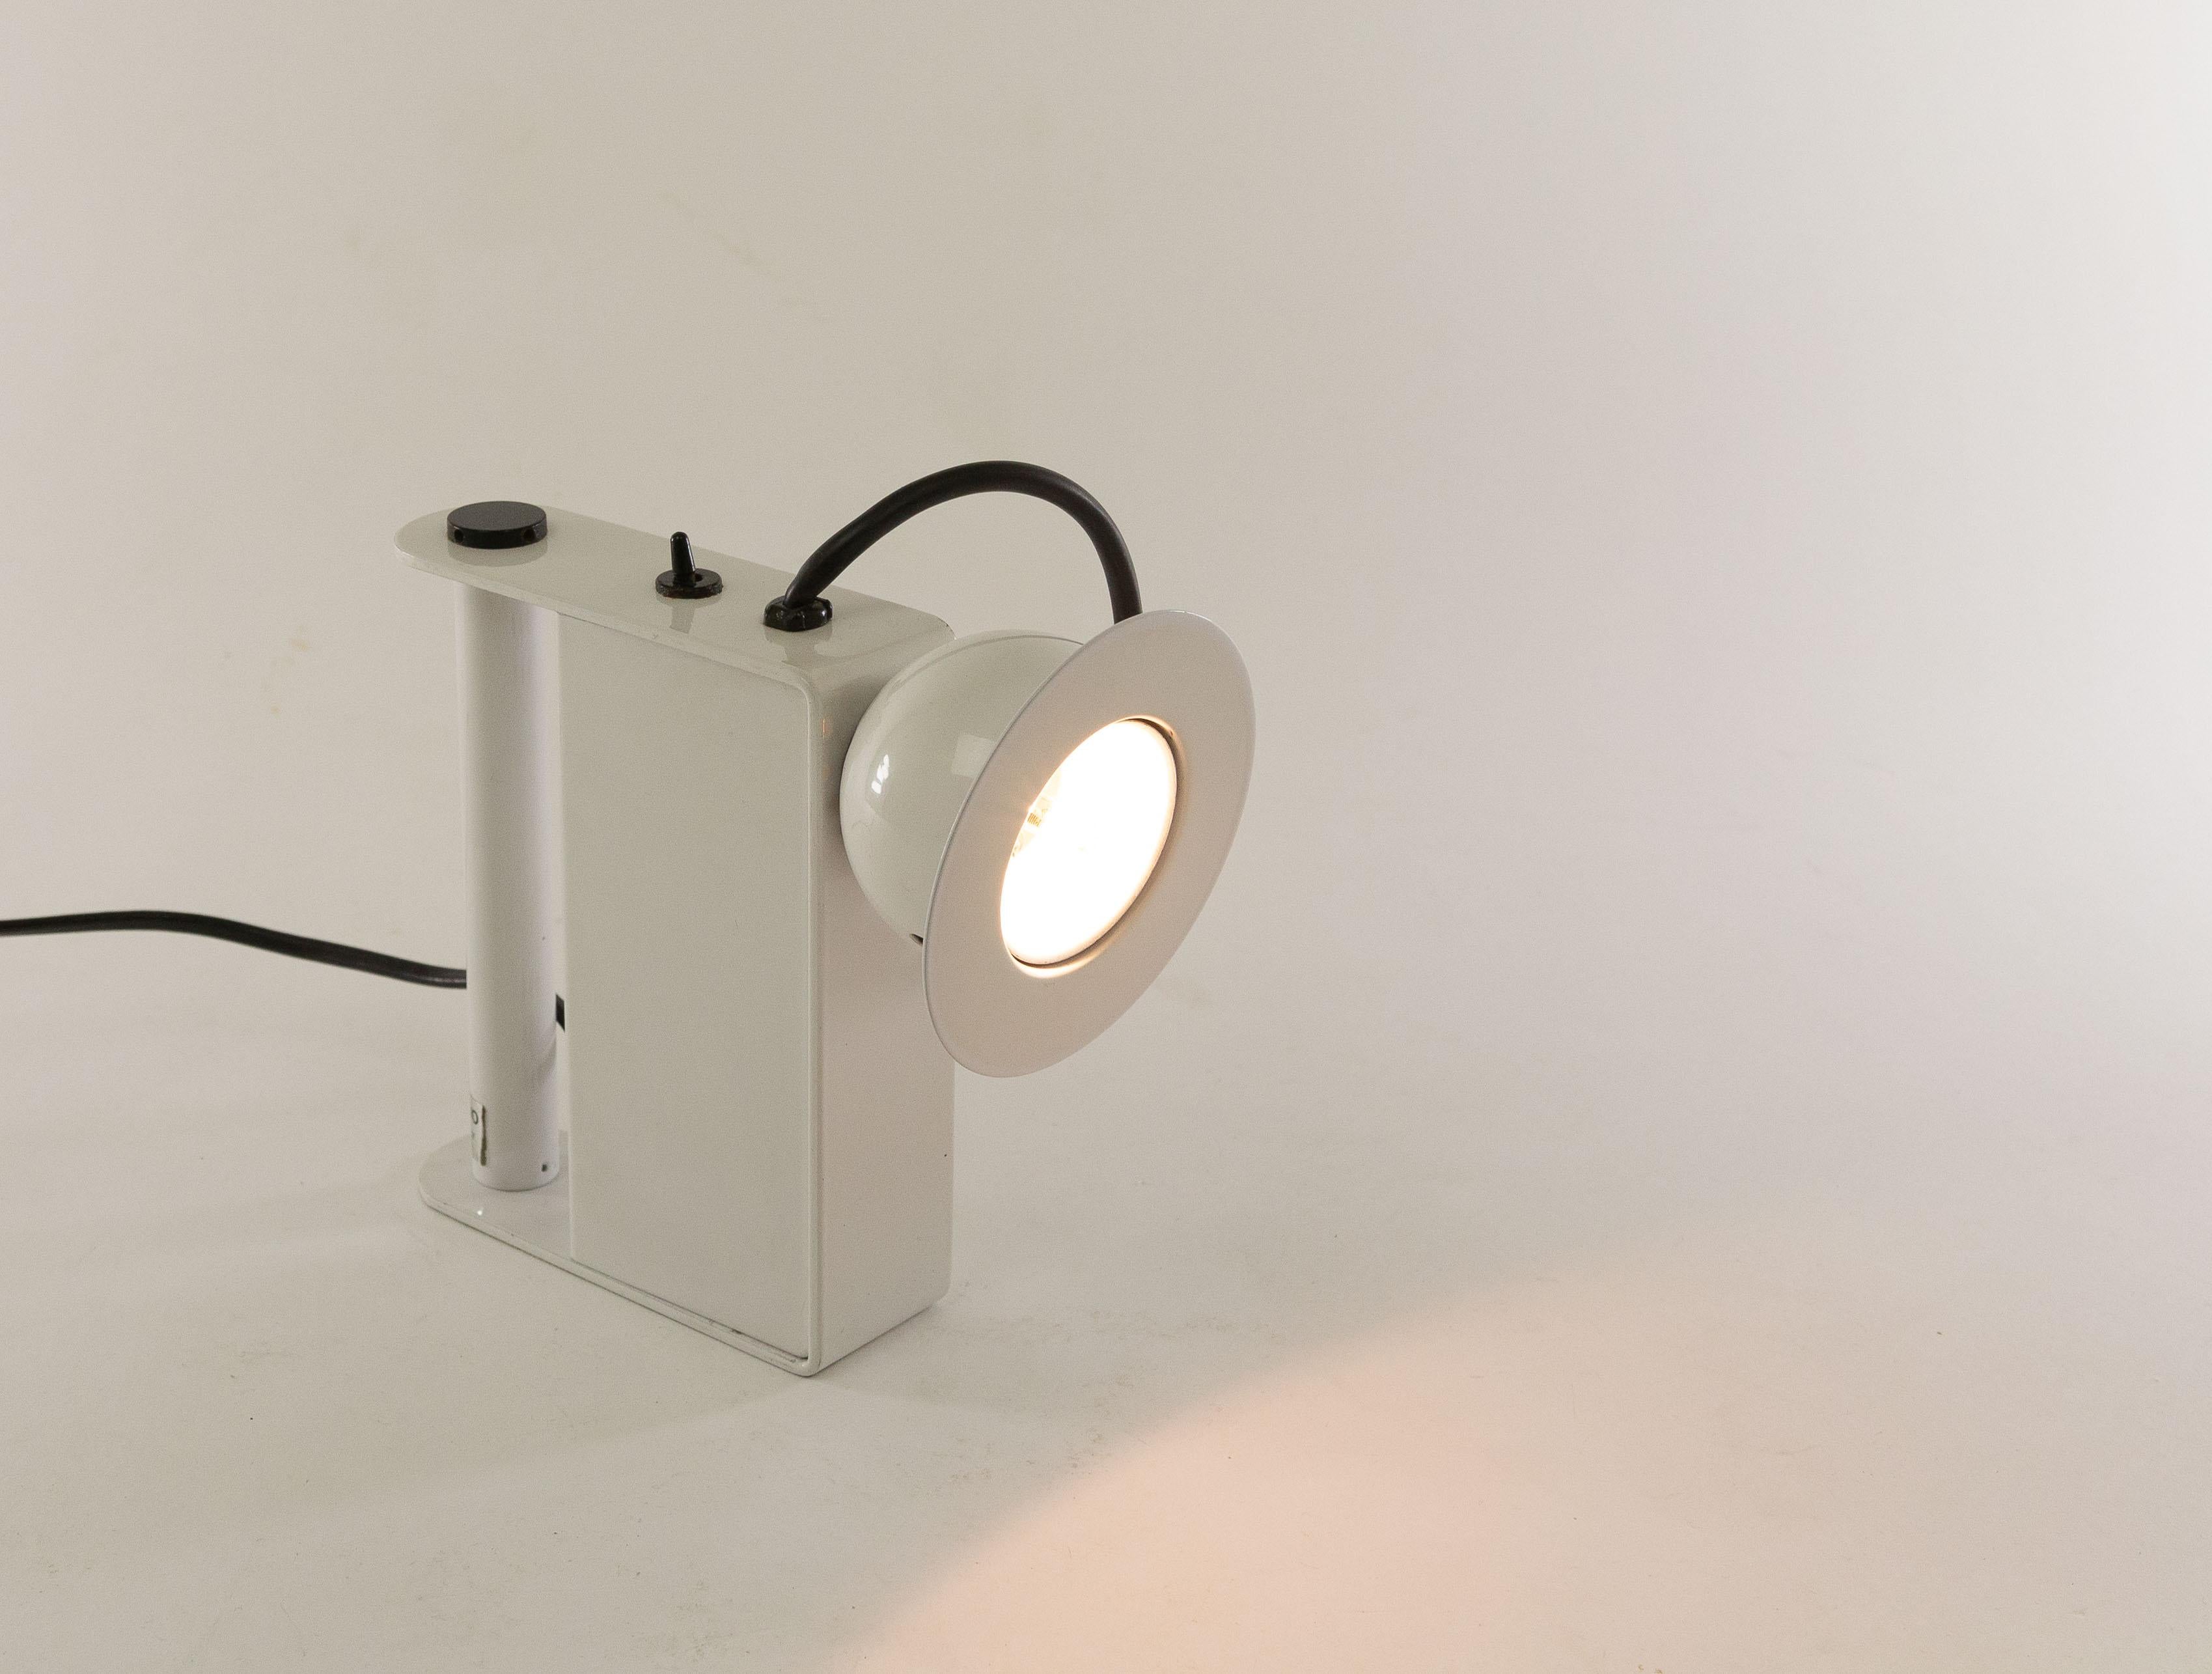 Minibox table lamp designed by Gae Aulenti & Piero Castiglioni and manufactured by Stilnovo in 1980.

This halogen table lamp can also be used as a 'torch' thanks to the handy handle. However, due to the power cord, it can only be used inside the